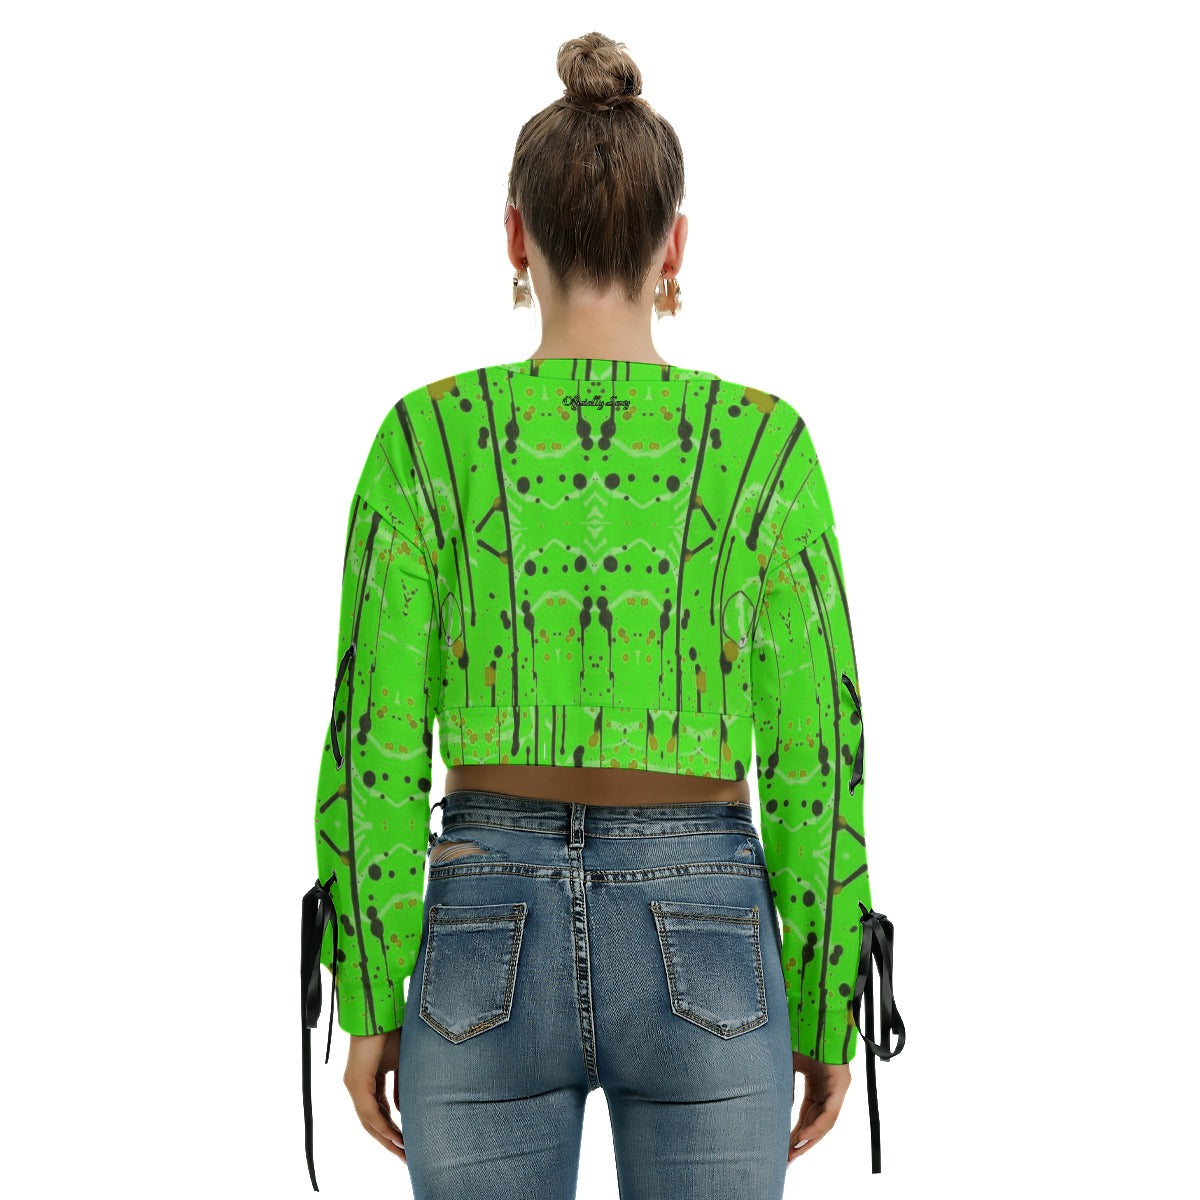 Officially Sexy Creepy Boy Collection Women's Long Sleeve Cropped Neon Green Sweatshirt Back